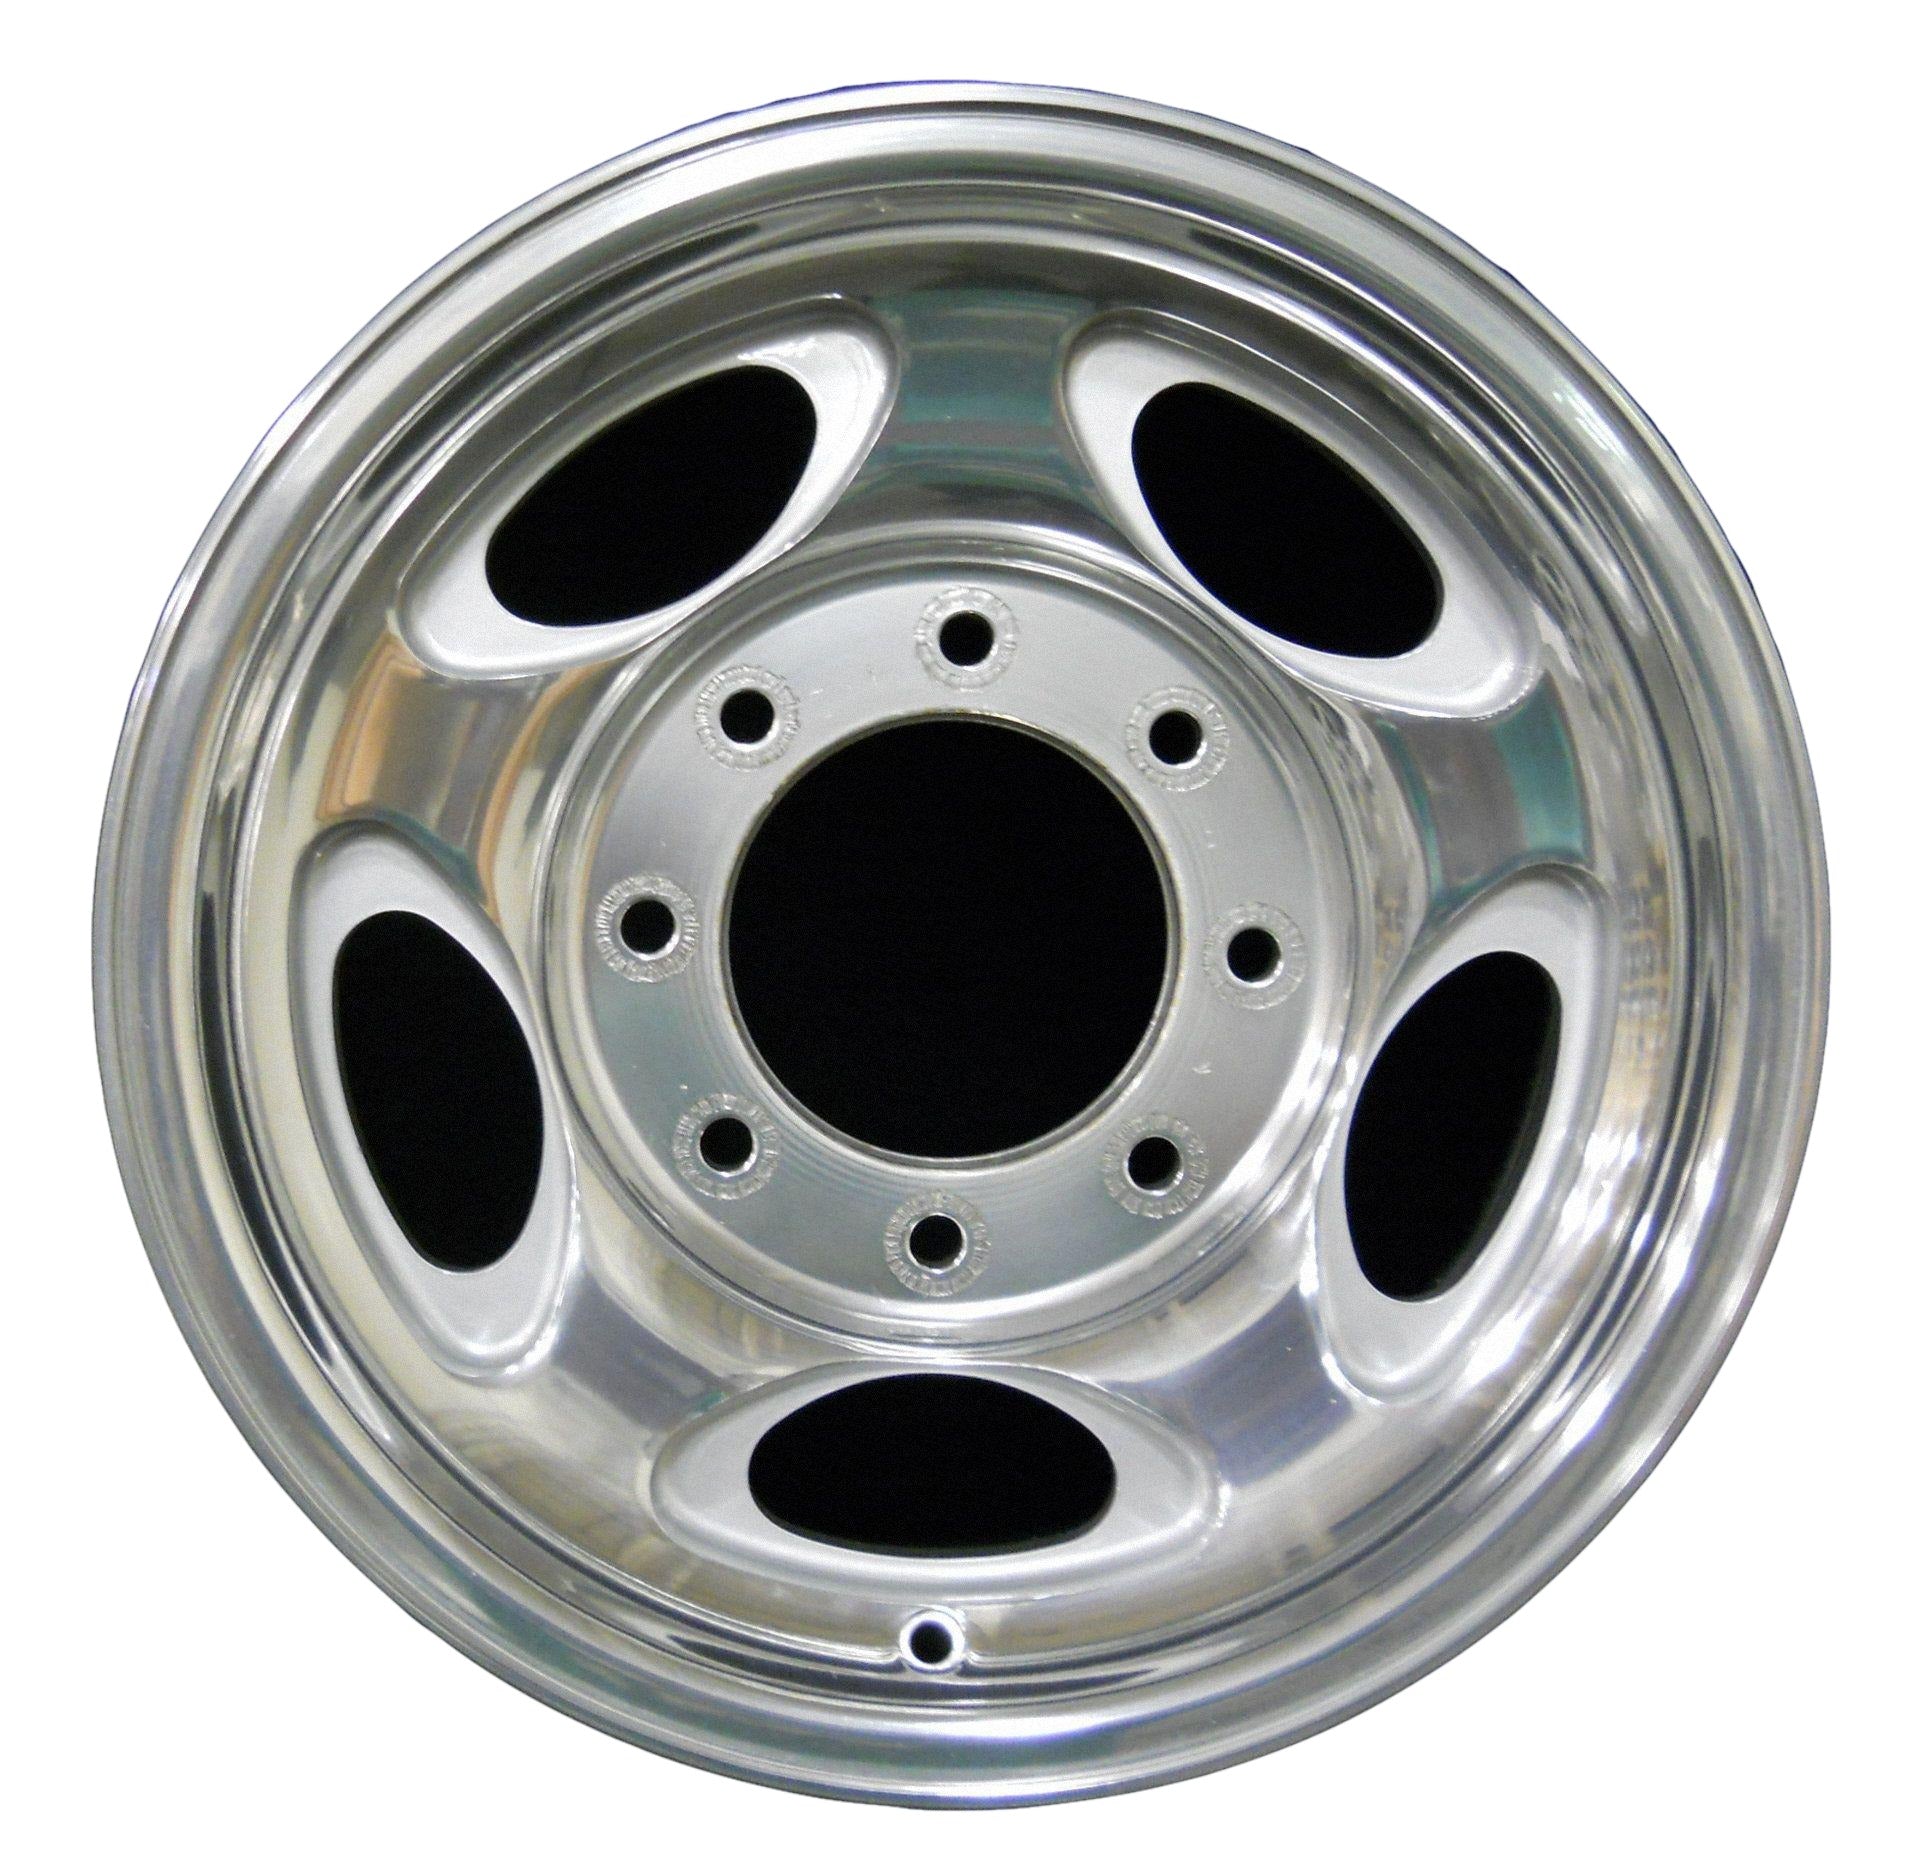 Ford Excursion  2000, 2001, 2002, 2003, 2004 Factory OEM Car Wheel Size 16x7 Alloy WAO.3408A.LS01.TPOL